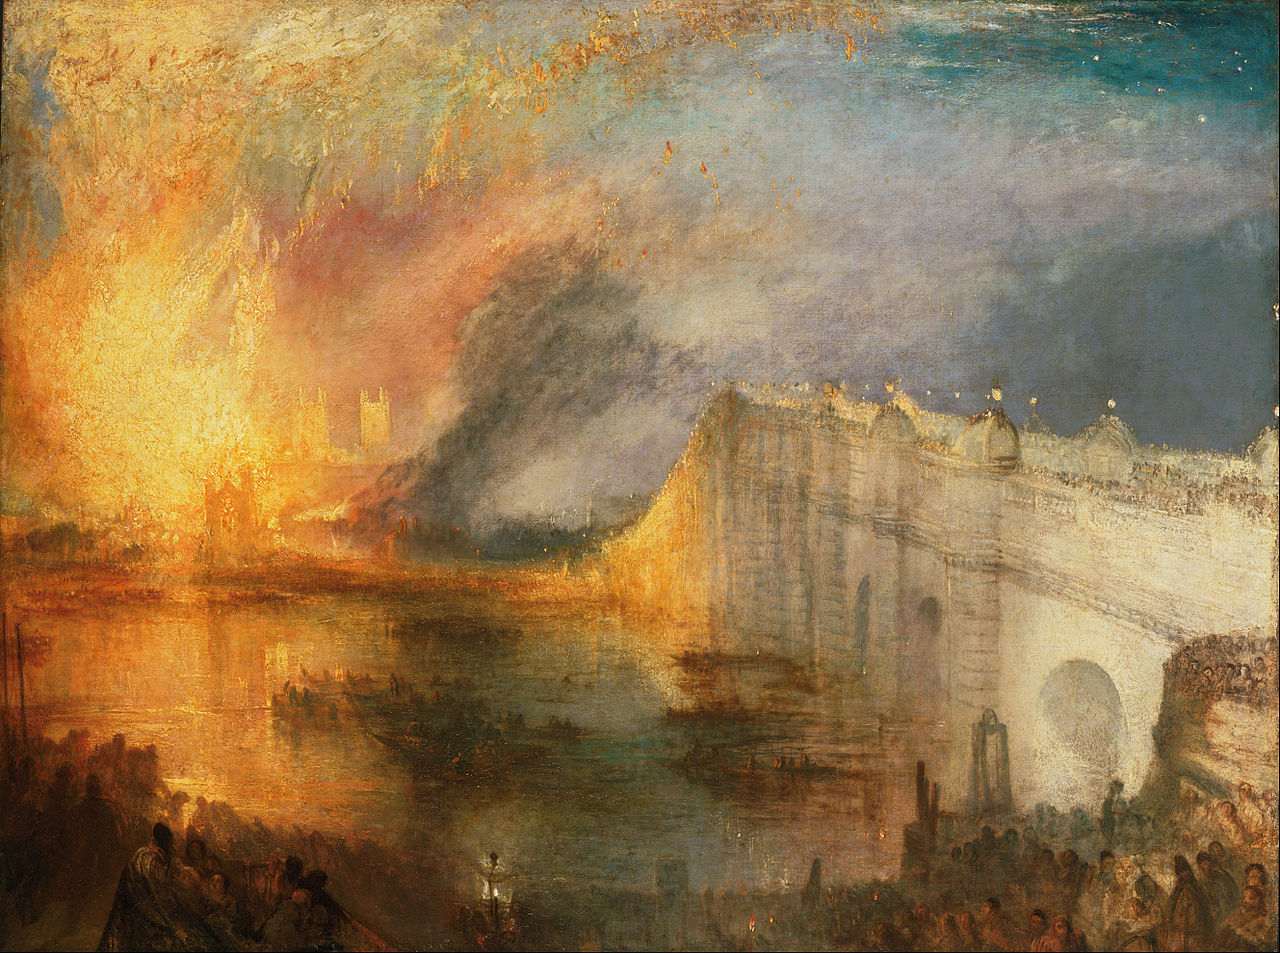 1280px-Joseph_Mallord_William_Turner,_English_-_The_Burning_of_the_Houses_of_Lords_and_Commons,_October_16,_1834_-_Google_Art_Project